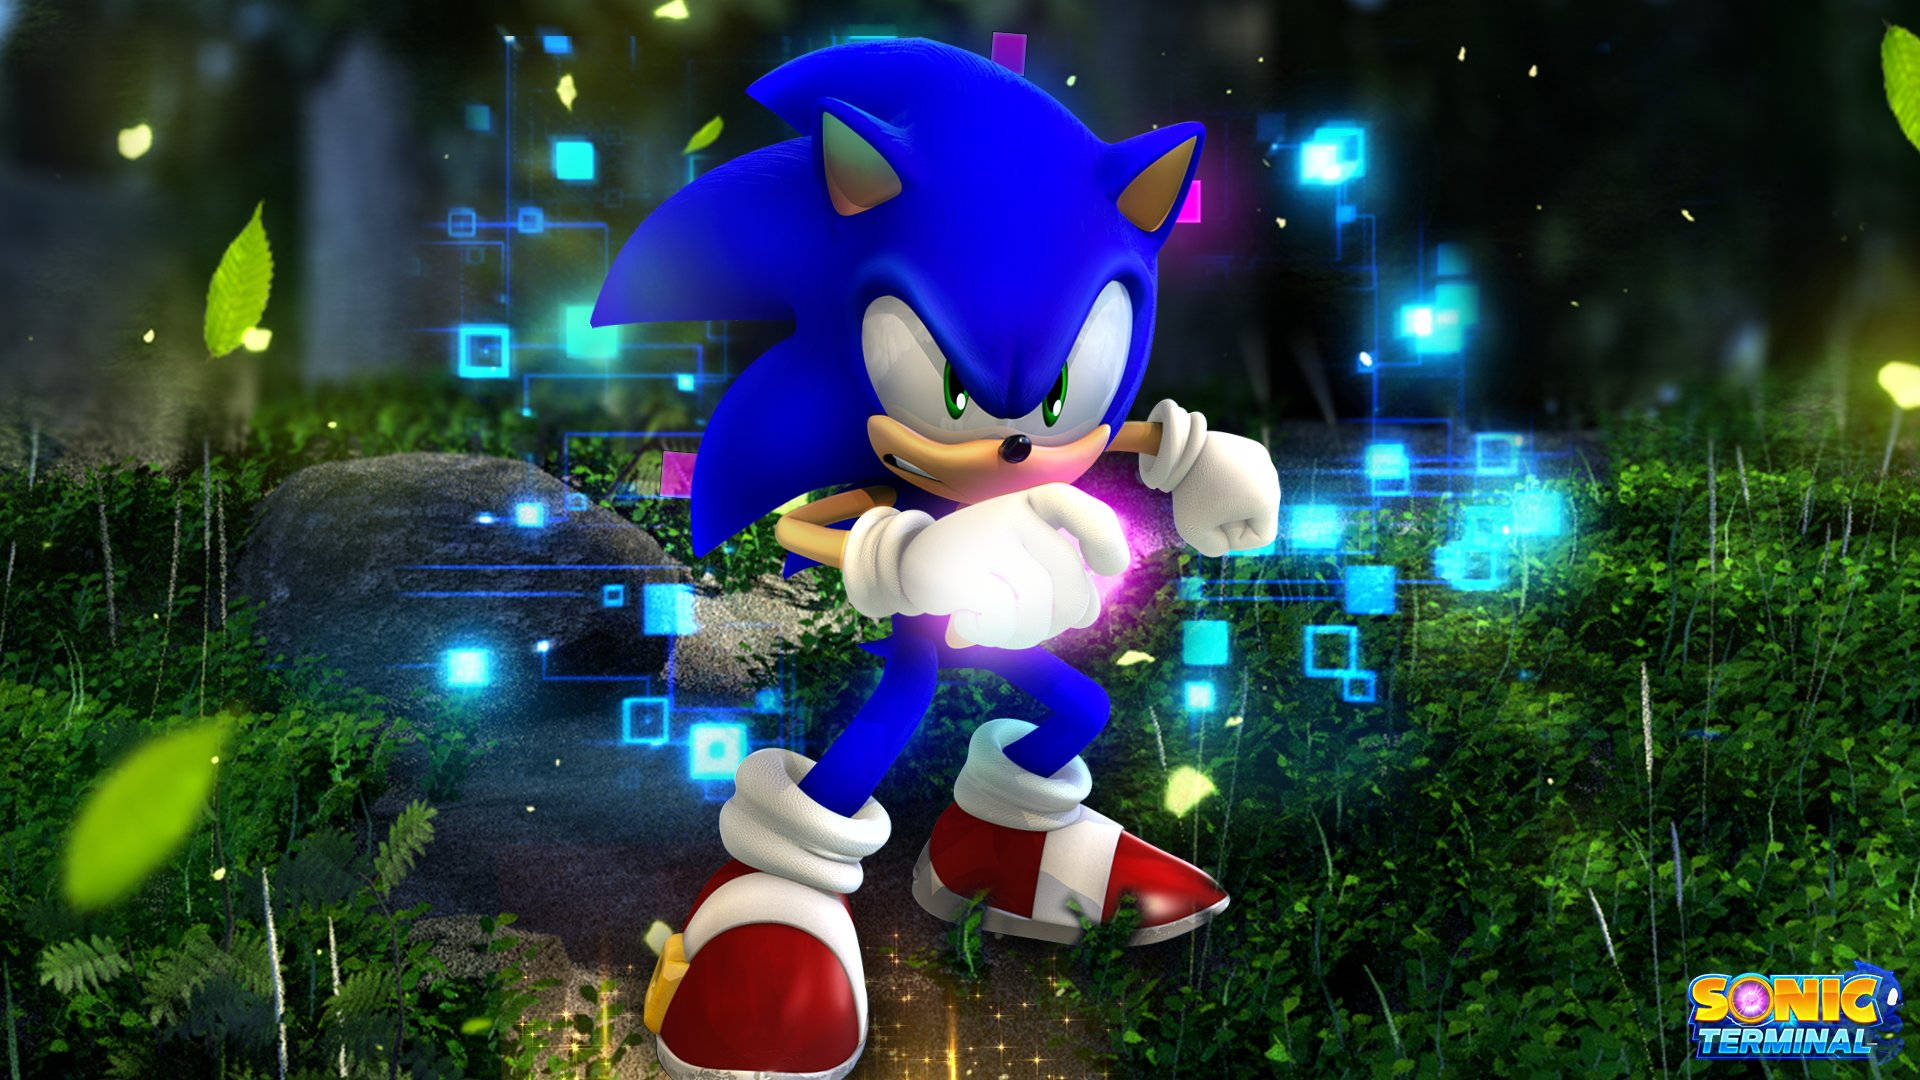 Speed along with Cool Sonic! Wallpaper